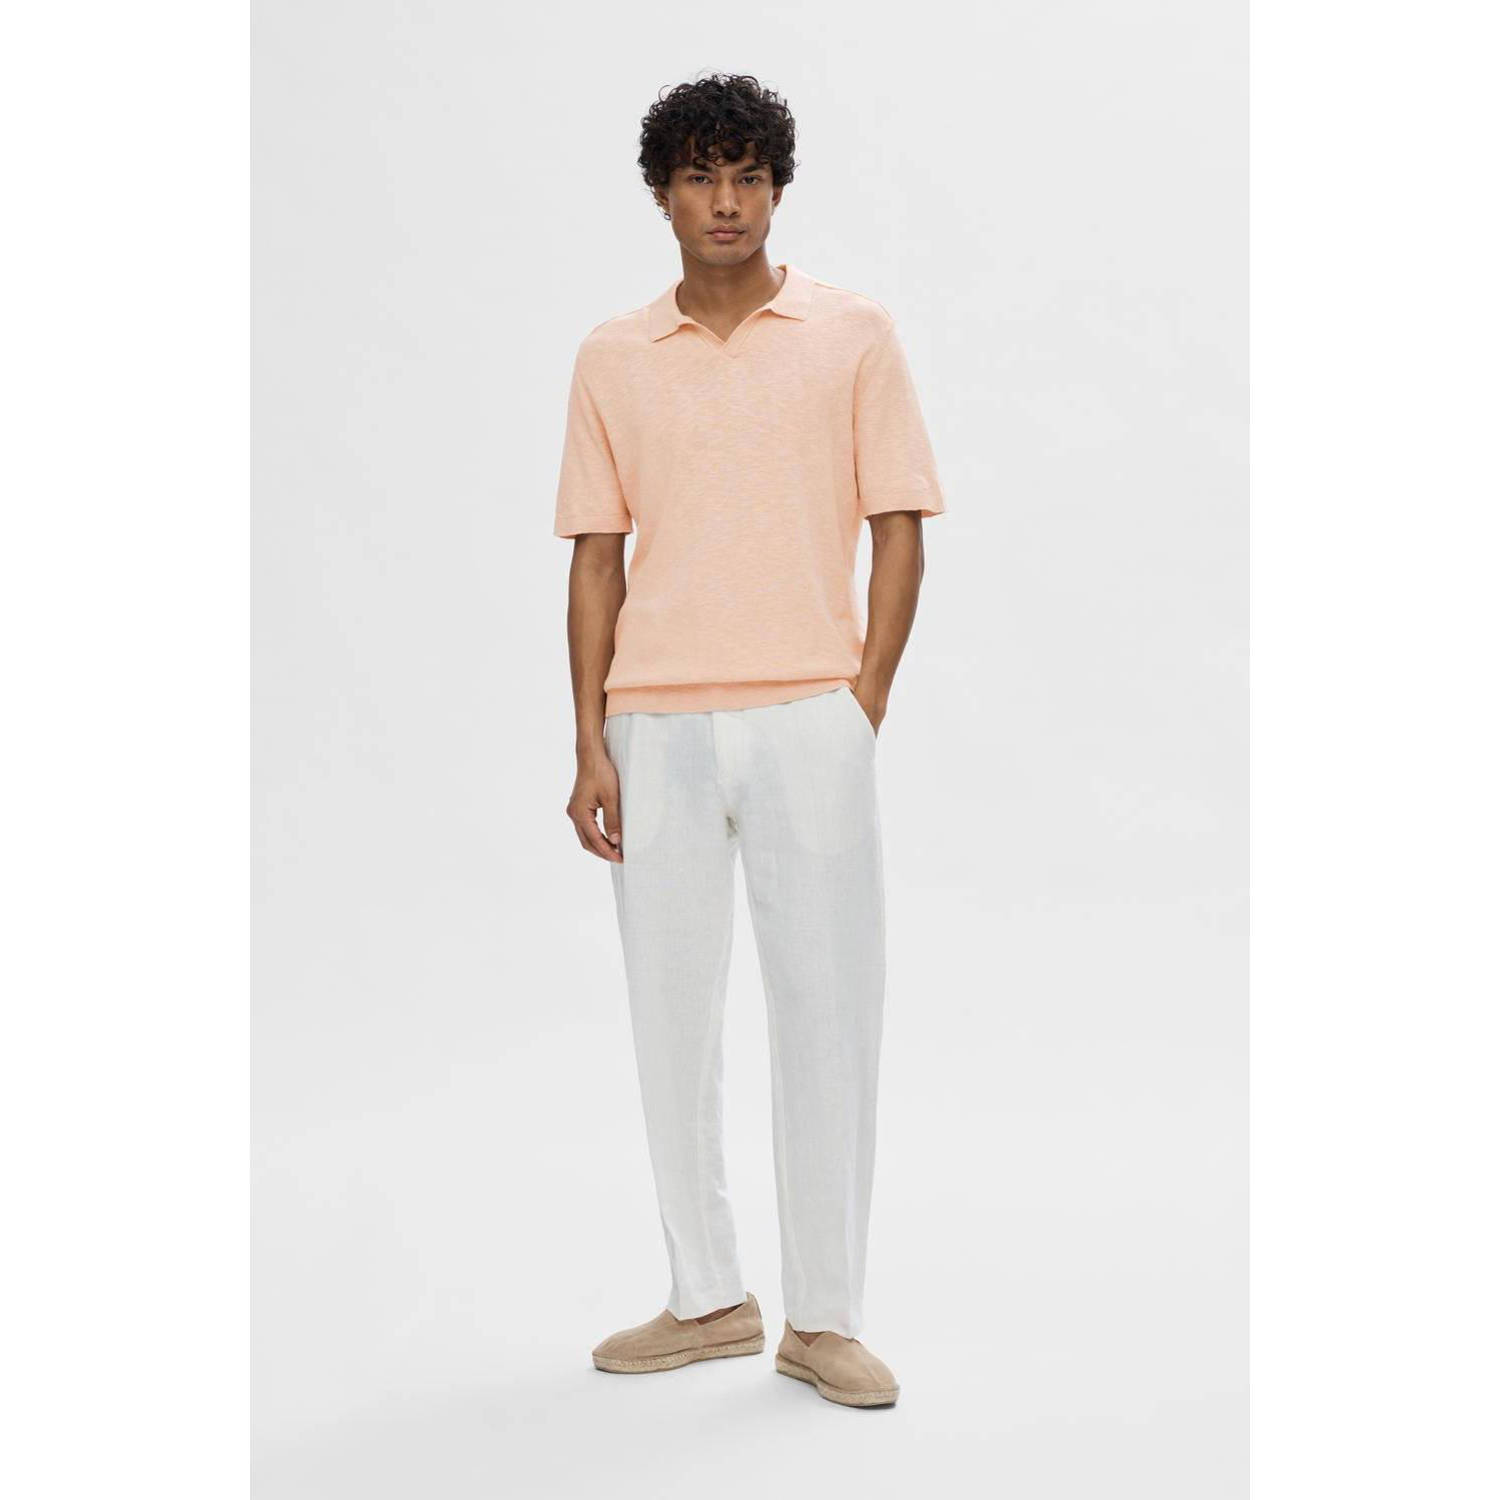 SELECTED HOMME gemêleerde polo cameo rose